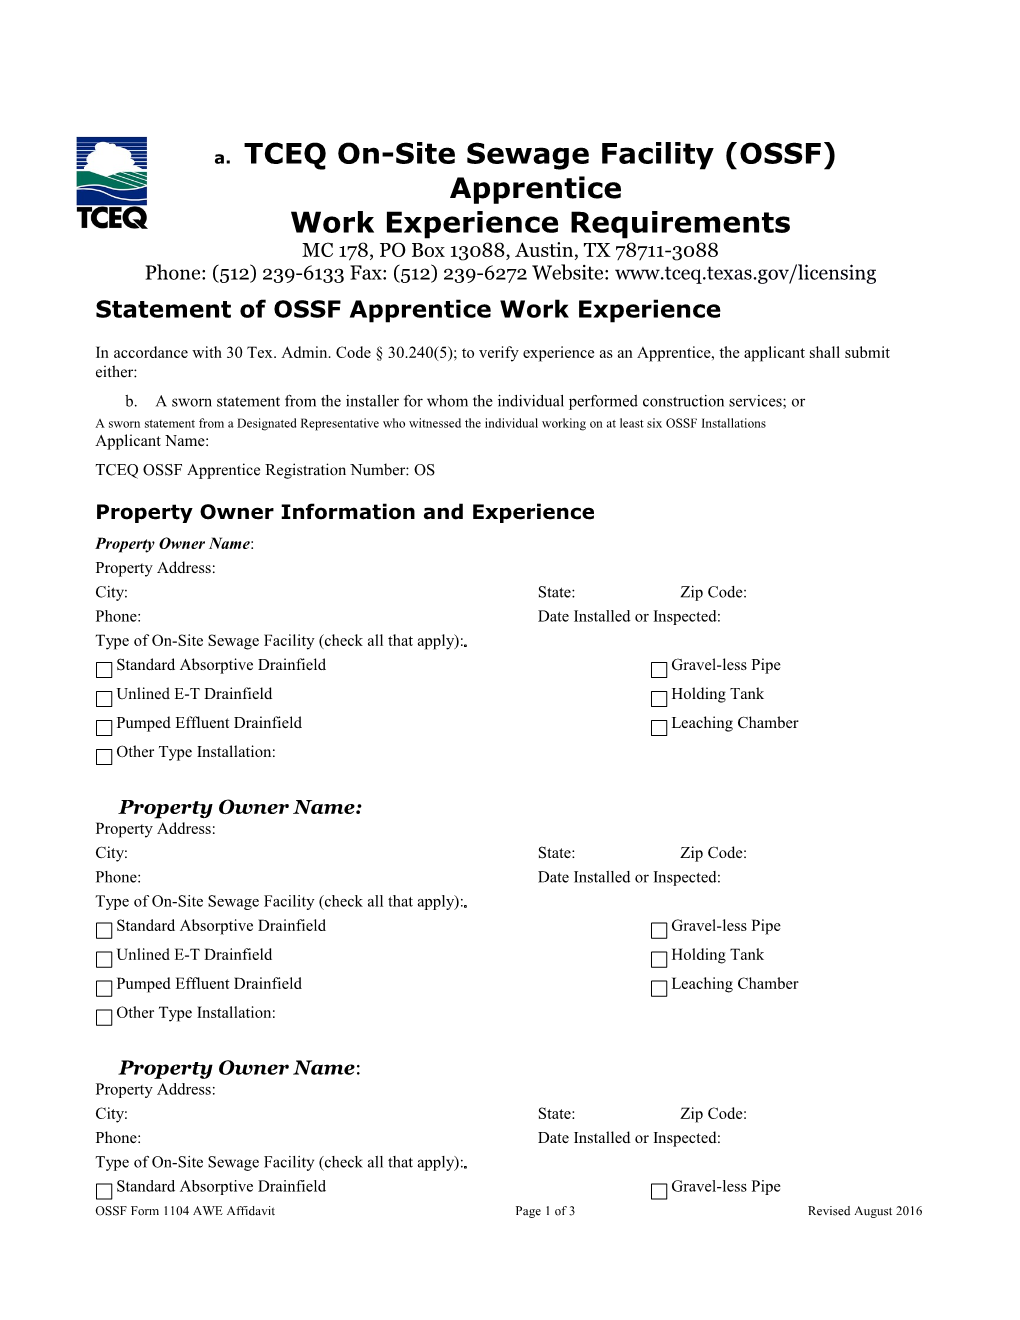 TCEQ On-Site Sewage Facility (OSSF) Apprentice Work Experience Requirements